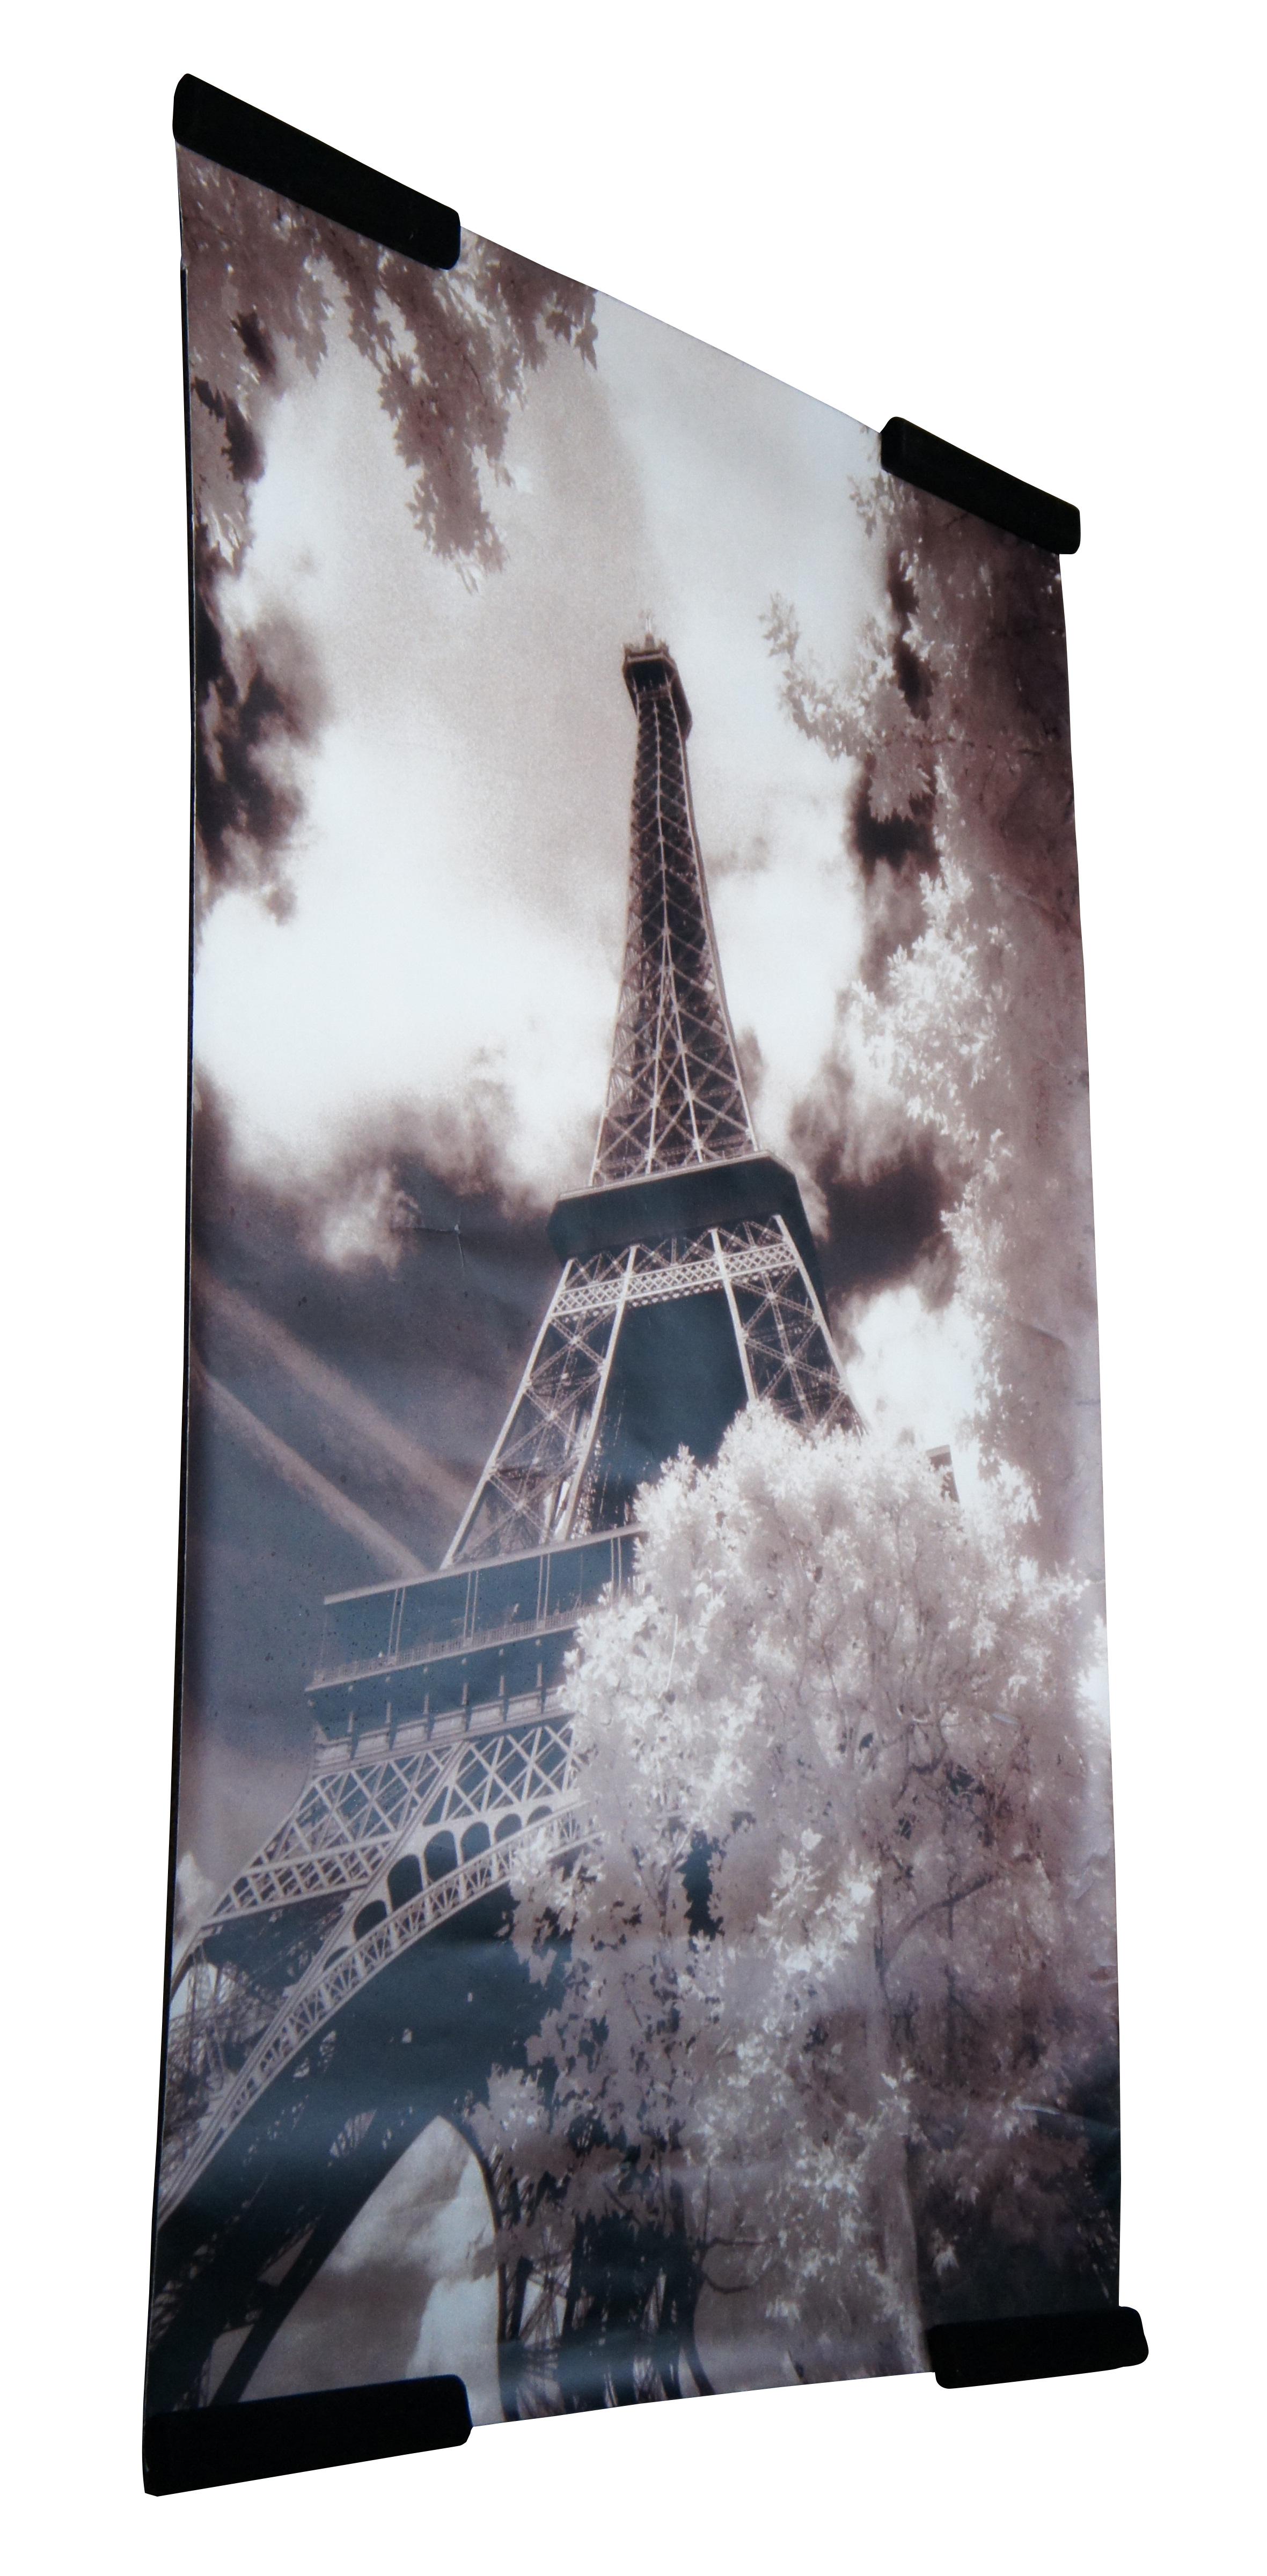 Huge sepia toned poster of the Eiffel Tower, looking up through the trees of the Champ de Mars, By Jon Arnold. Printed on Fujicolor Crystal Archive Paper by Fujifilm.

Jon Arnold has been passionate about photography ever since he bought his first